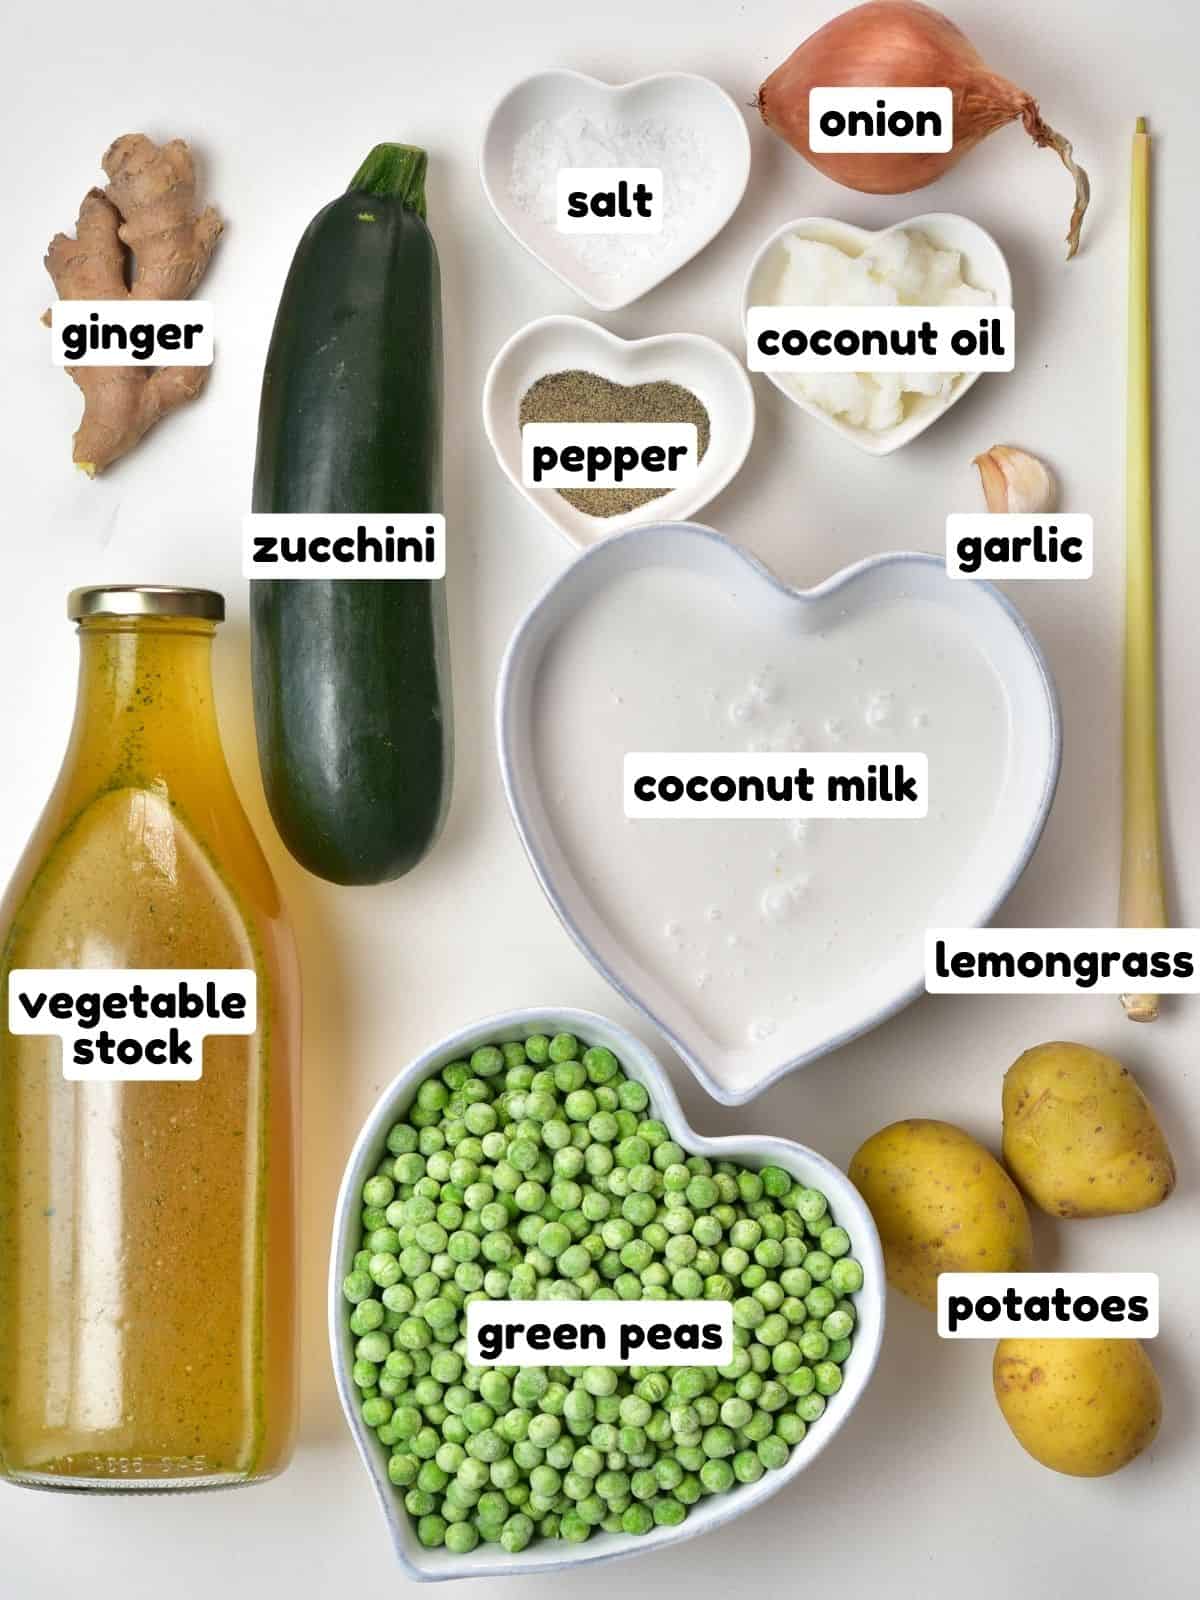 Ingredients for green pea soup